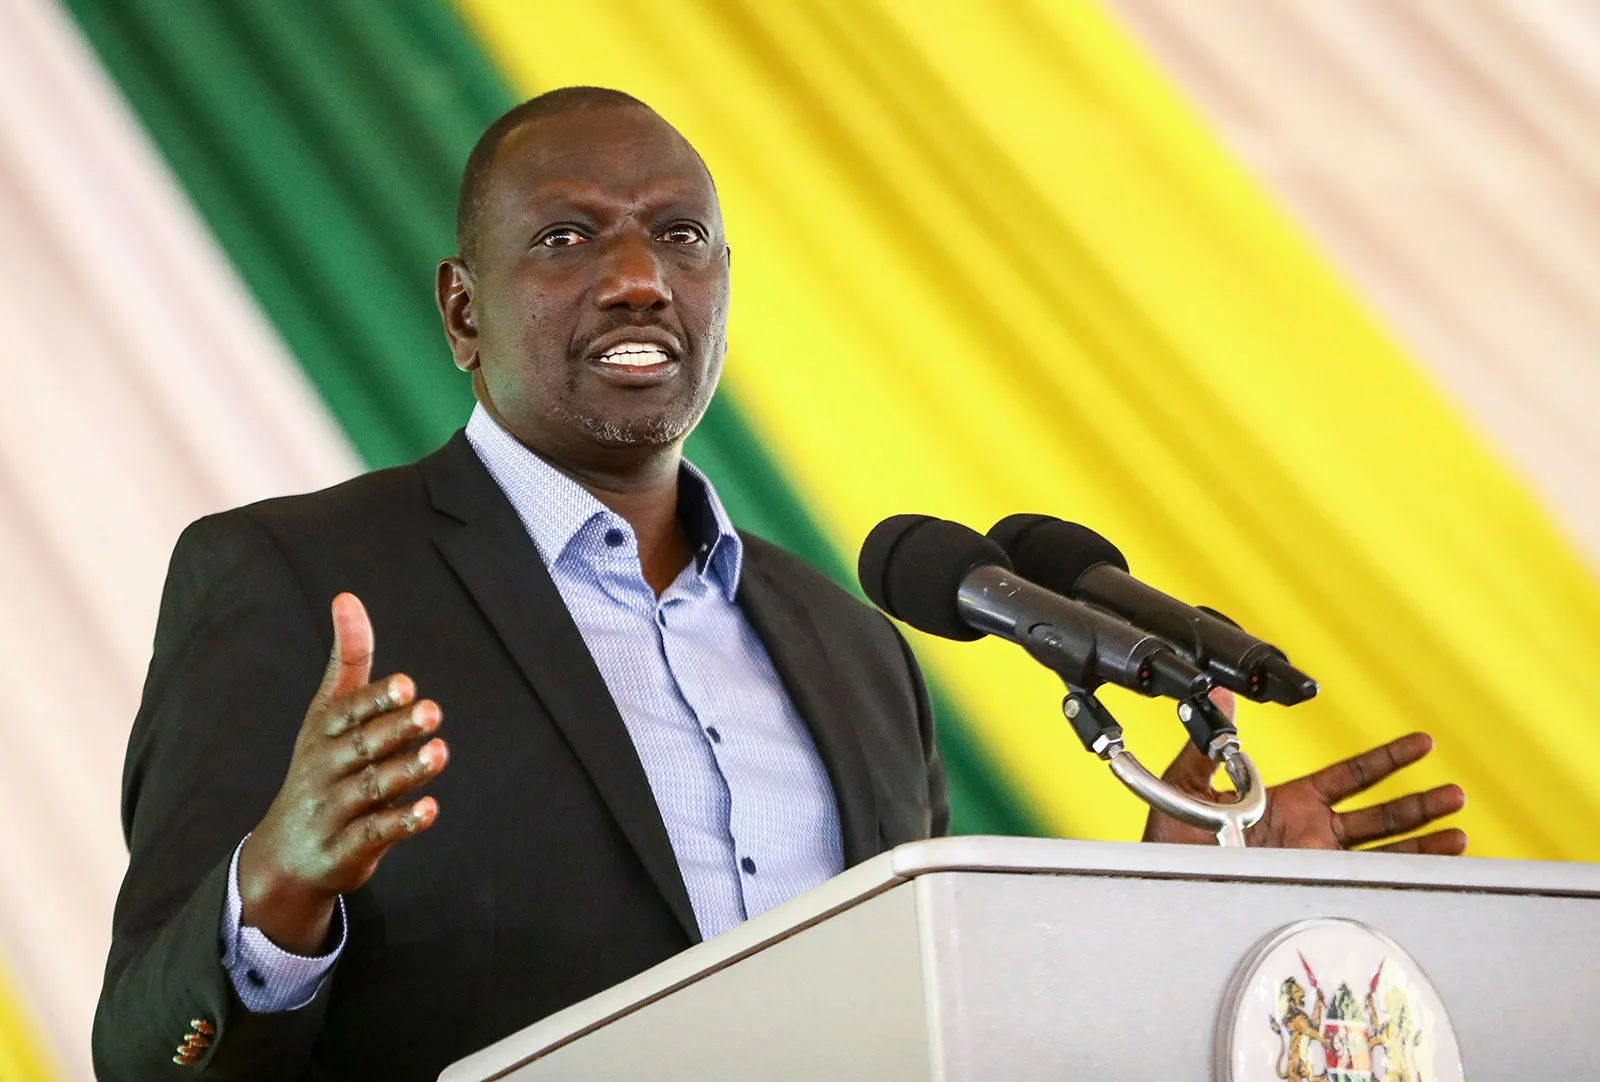 ‘Africa Doesn’t Need These Useless Borders’ -Kenyan President Ruto To Abolish Visa Restrictions For African Visitors